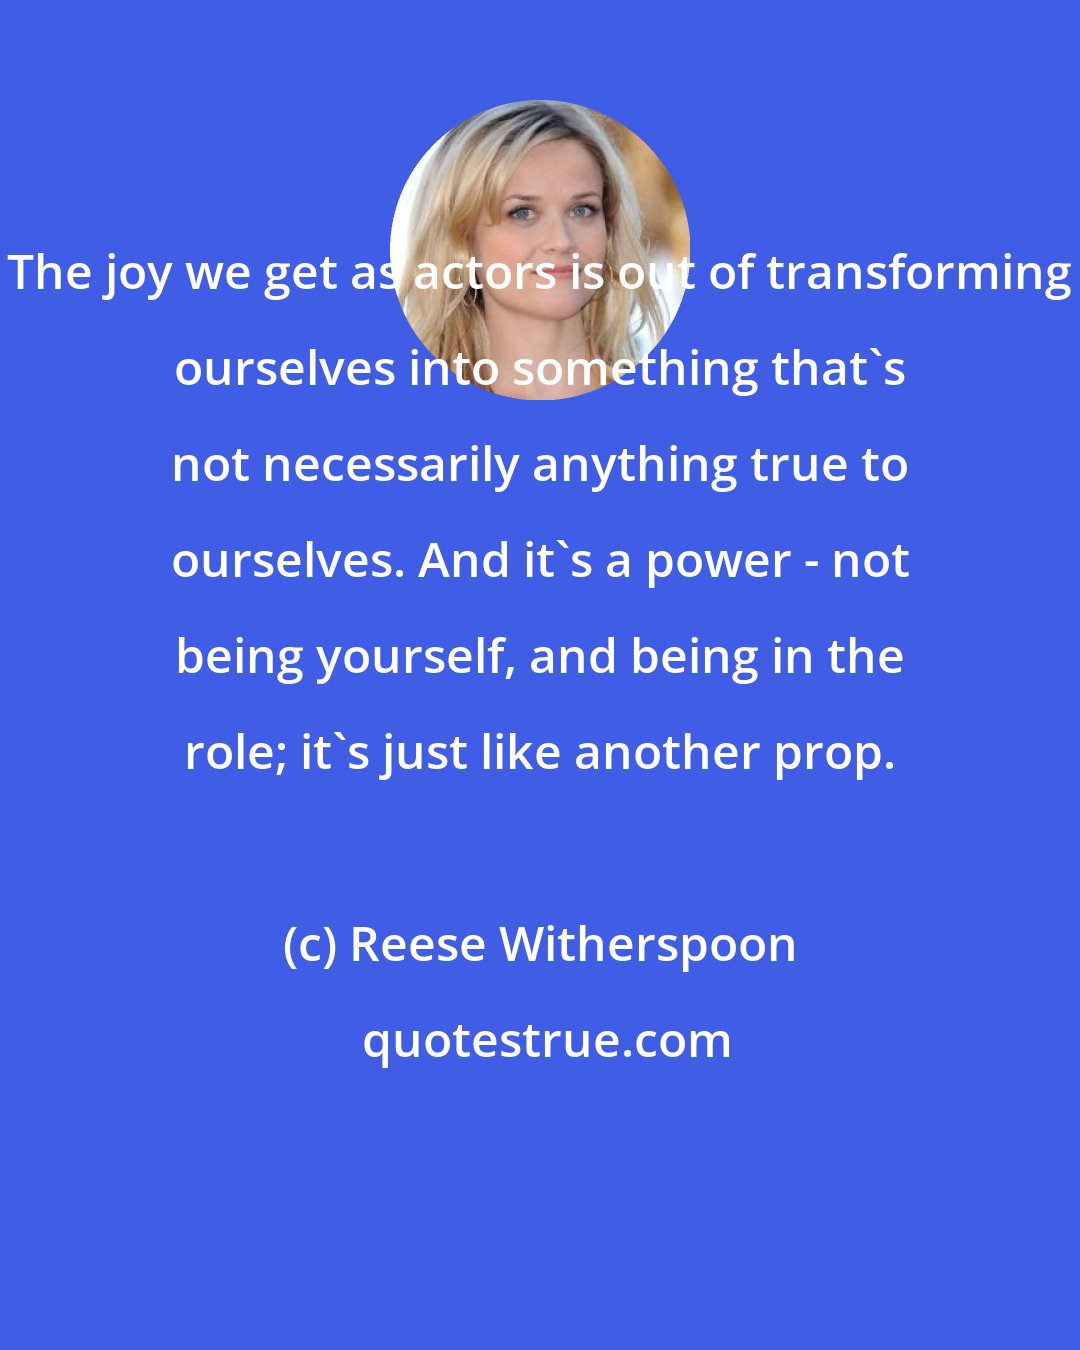 Reese Witherspoon: The joy we get as actors is out of transforming ourselves into something that's not necessarily anything true to ourselves. And it's a power - not being yourself, and being in the role; it's just like another prop.